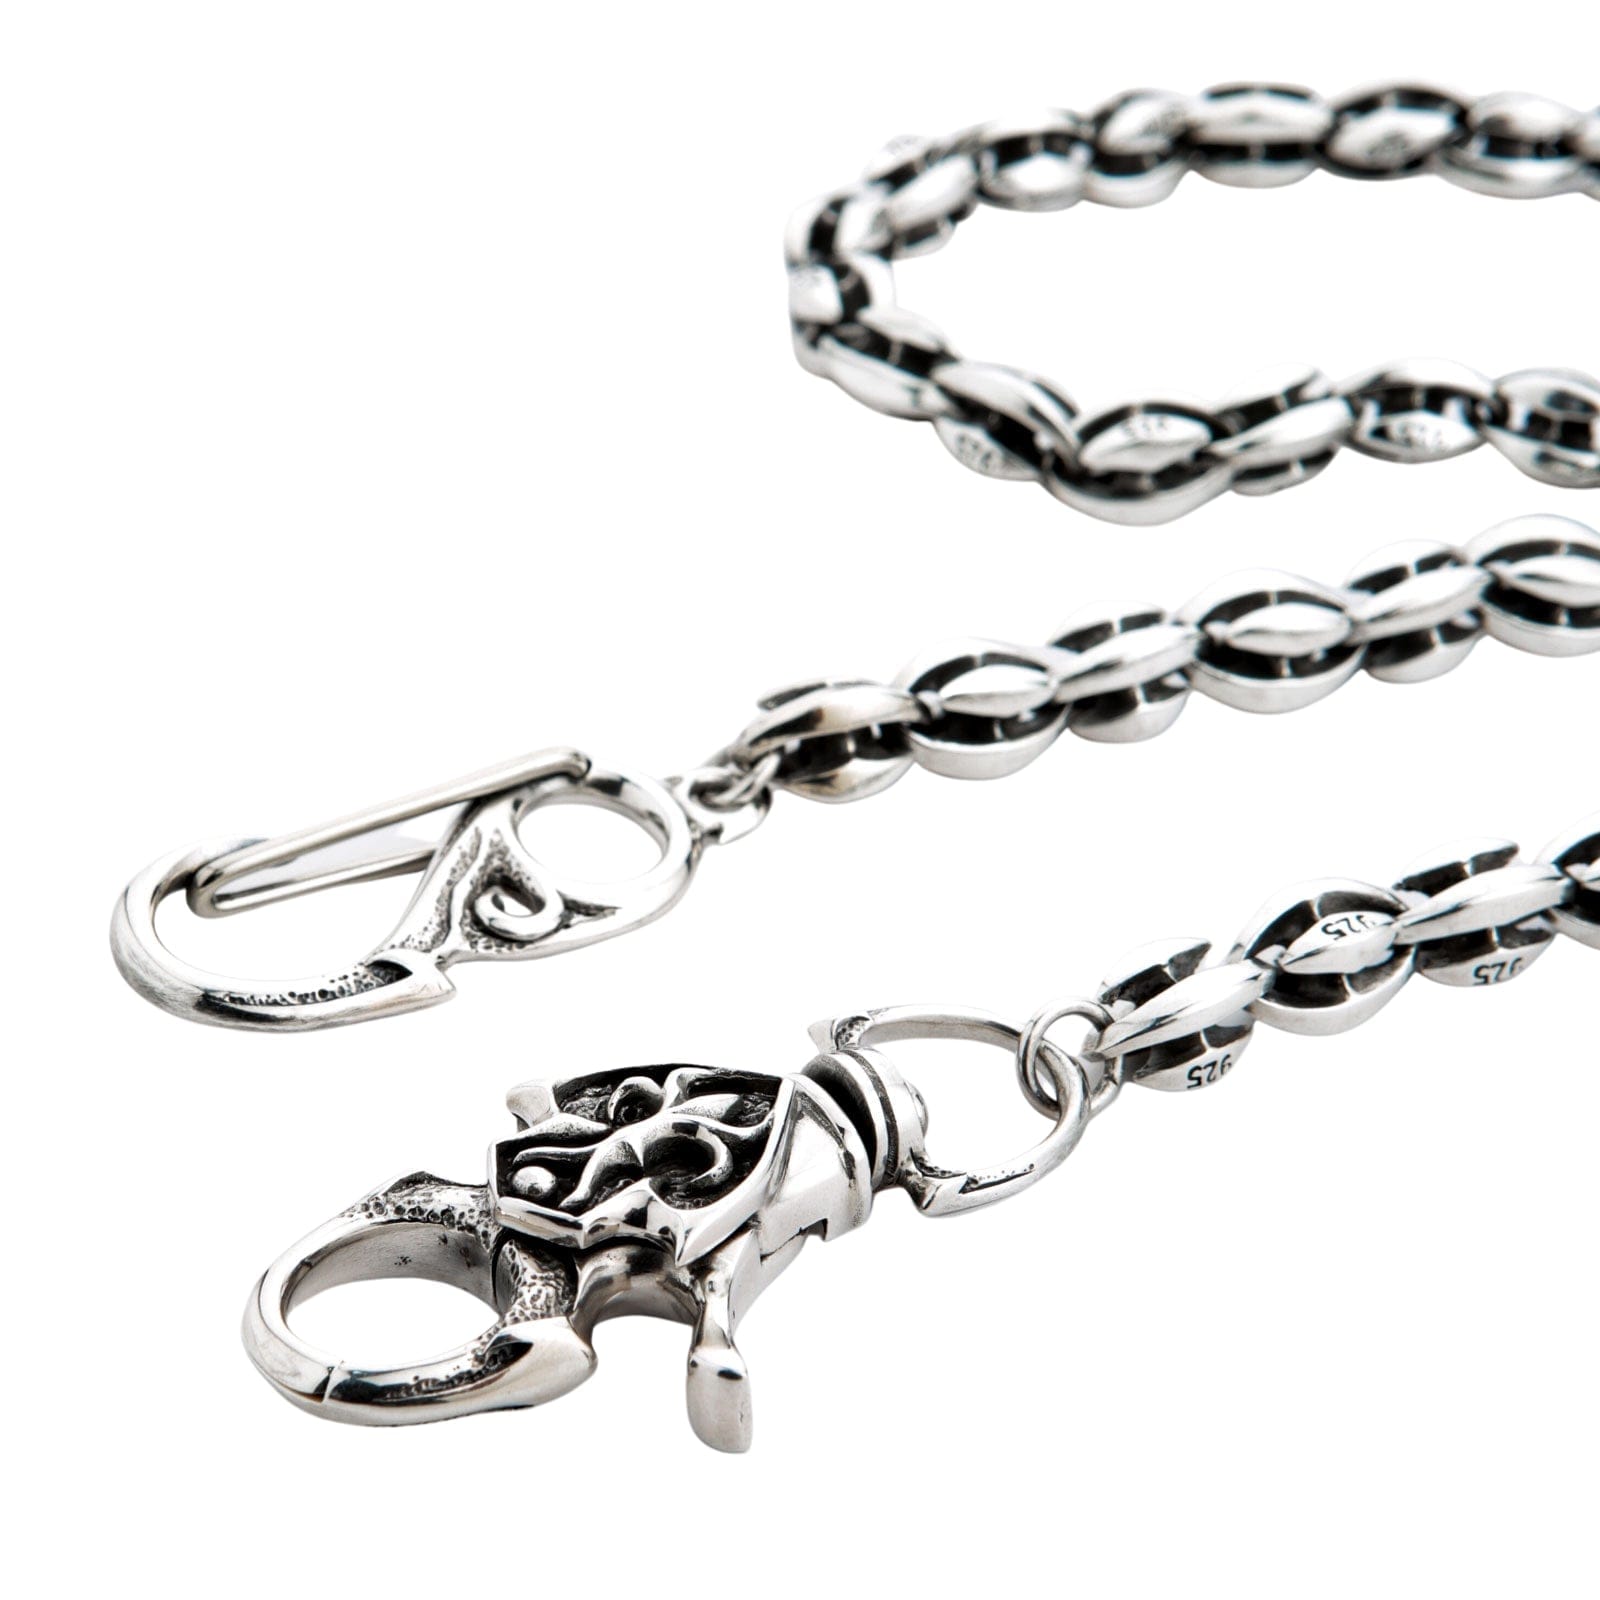 Wallet Chains With An Indian Head Clasp – SS Biker / Rock Star Rings